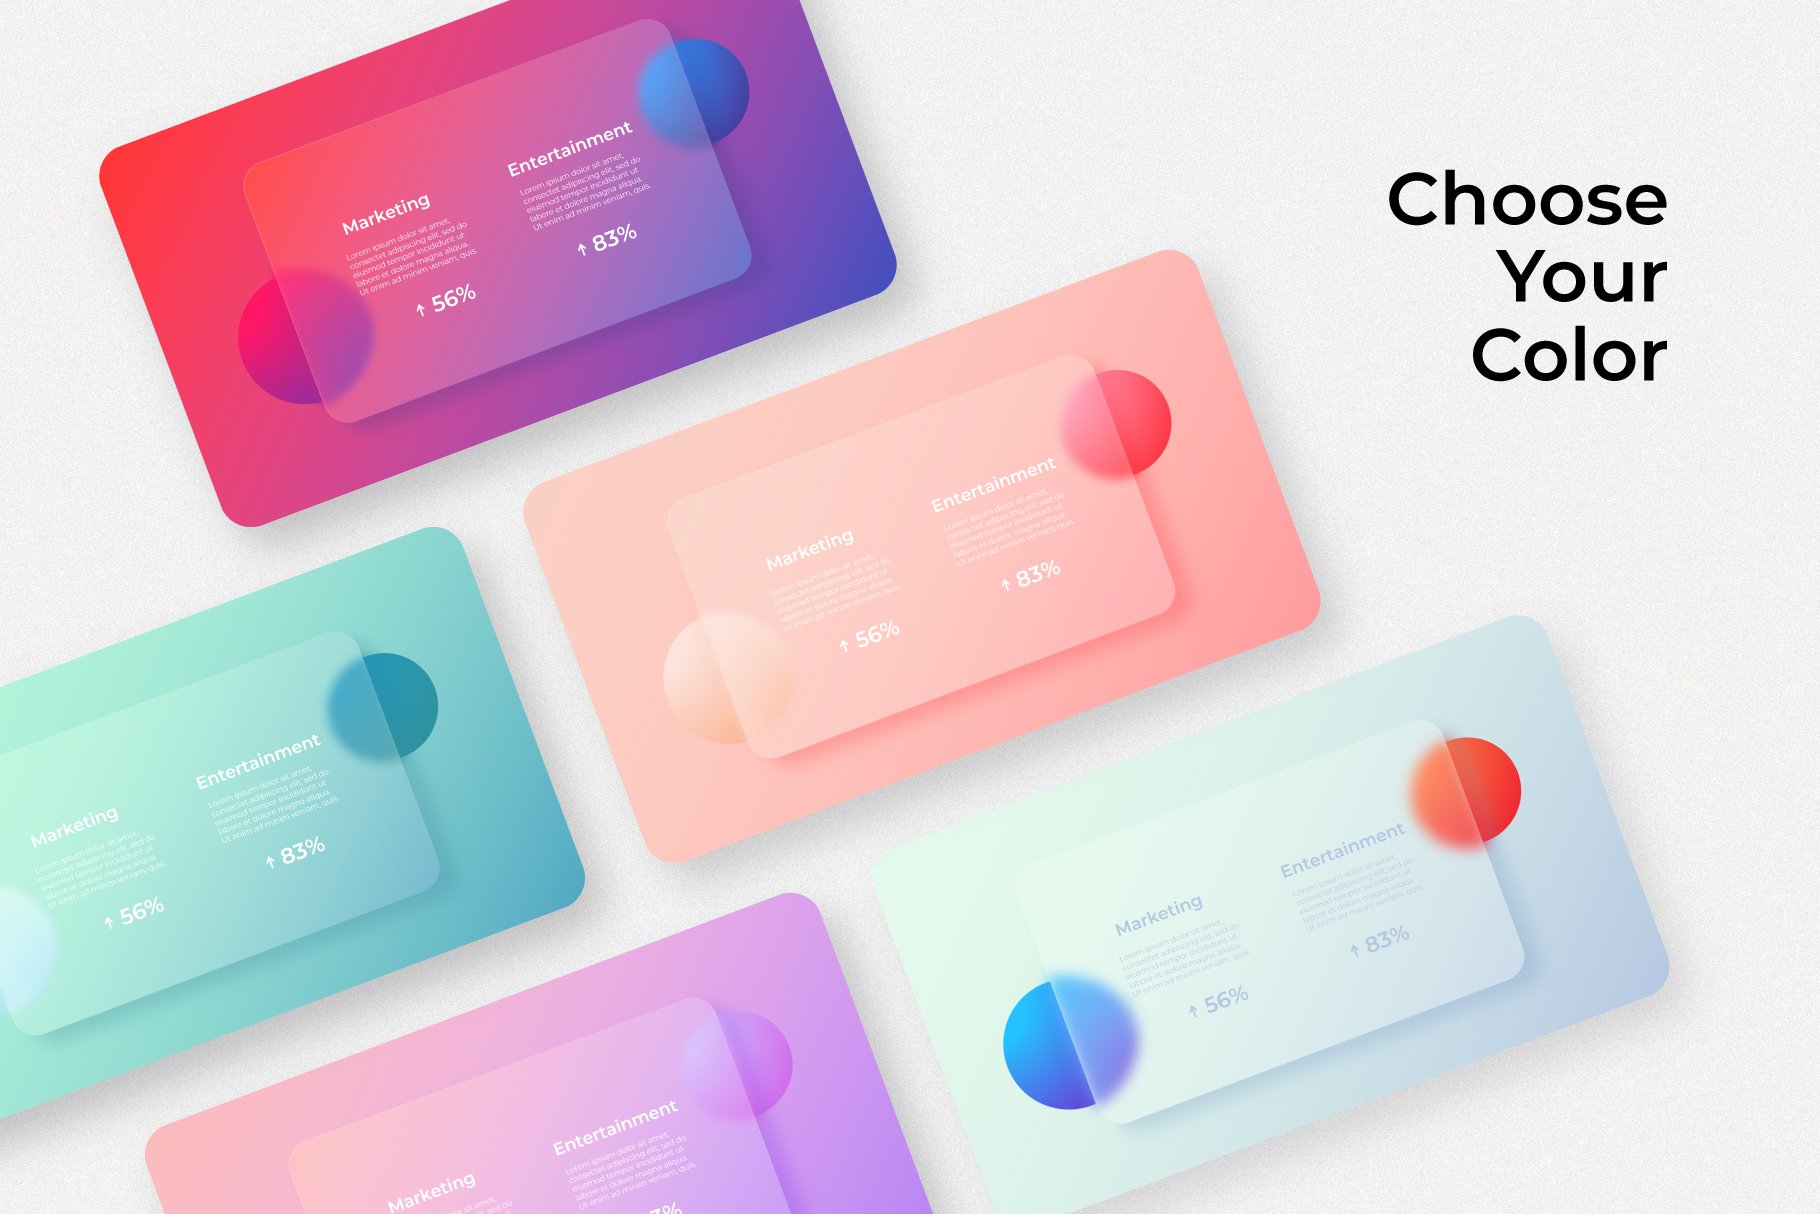 Also you can choose any other template color for your presentation.